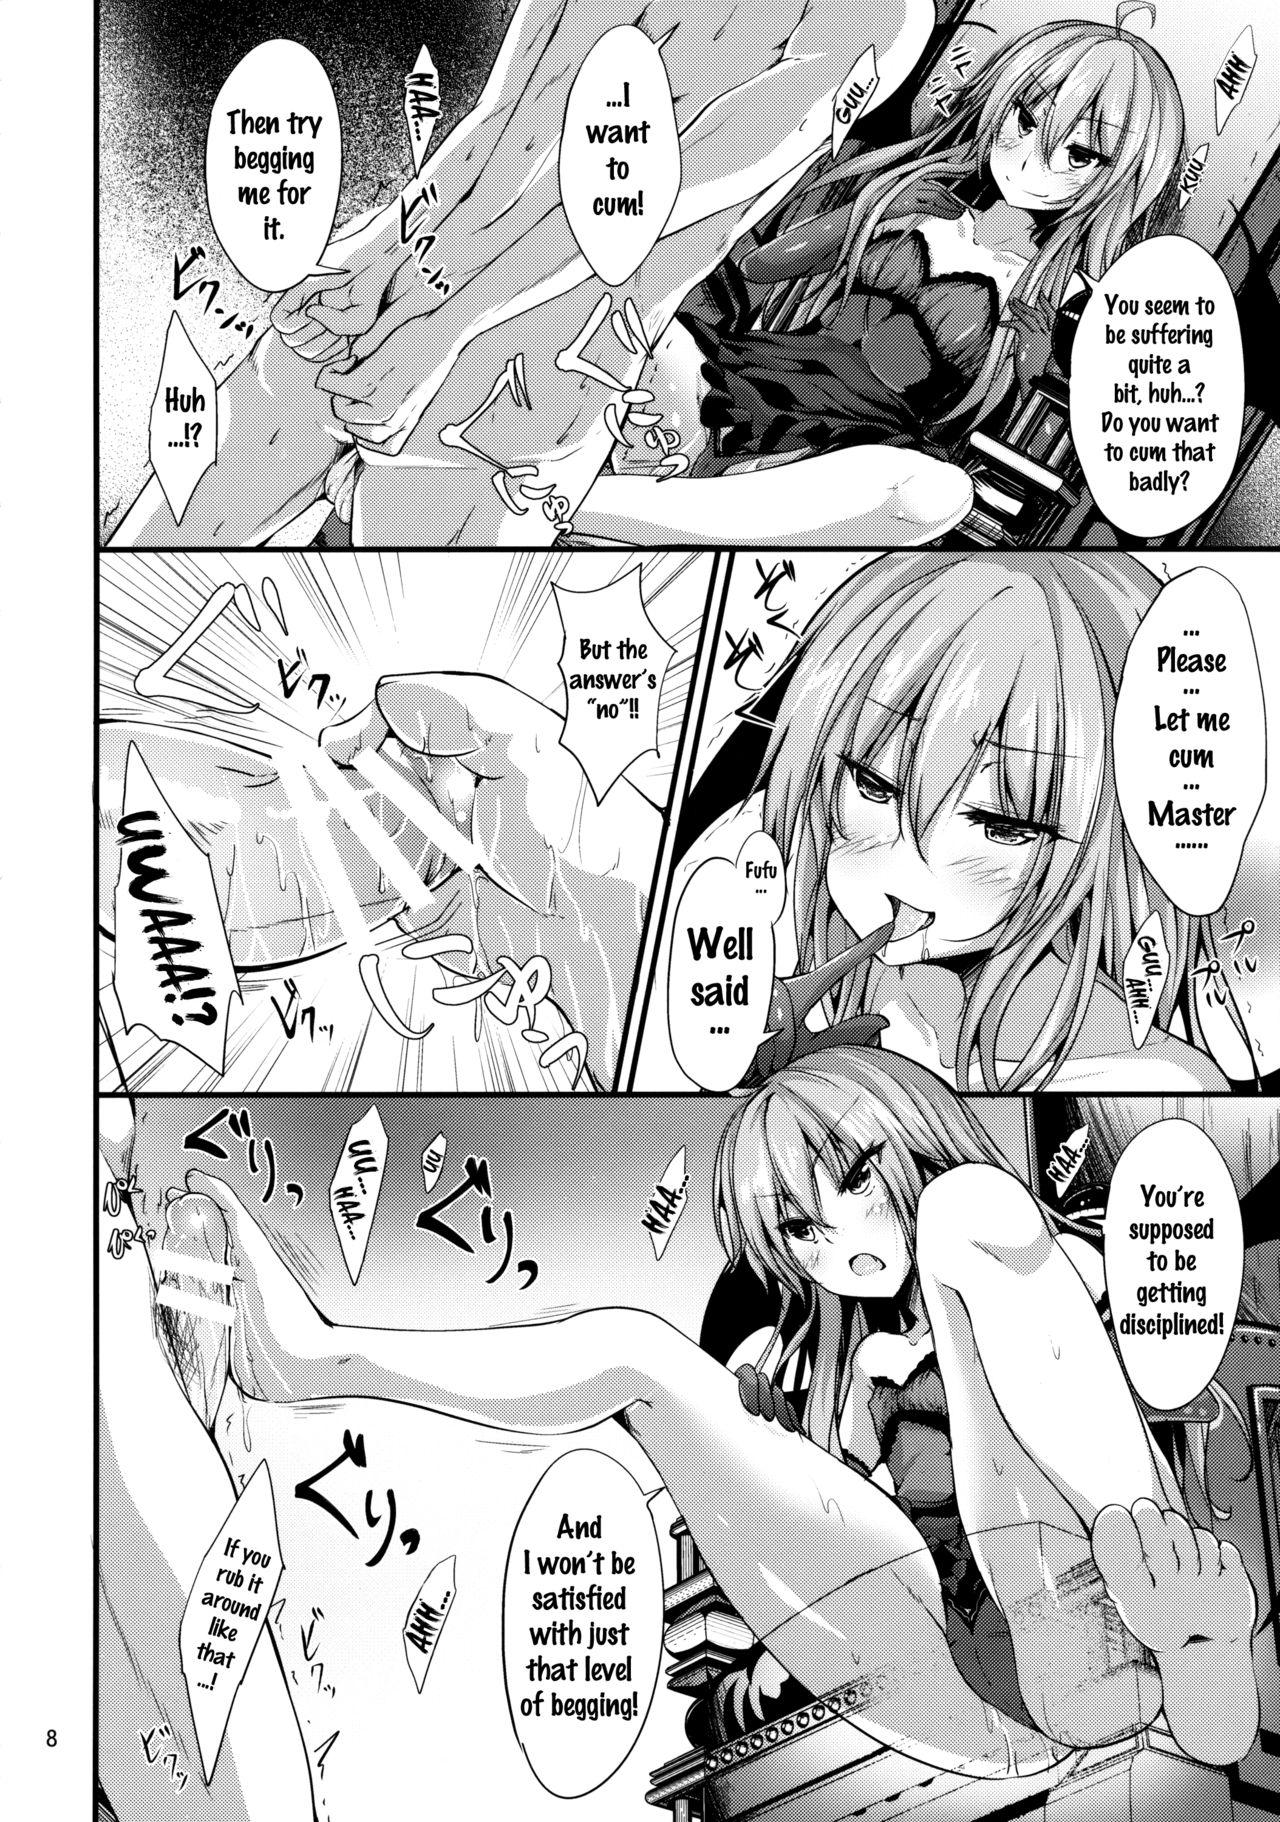 Indian Sex Remi no Motto Otona ni Narumon! | Remi's Becoming More of An Adult! - Touhou project Cunt - Page 7